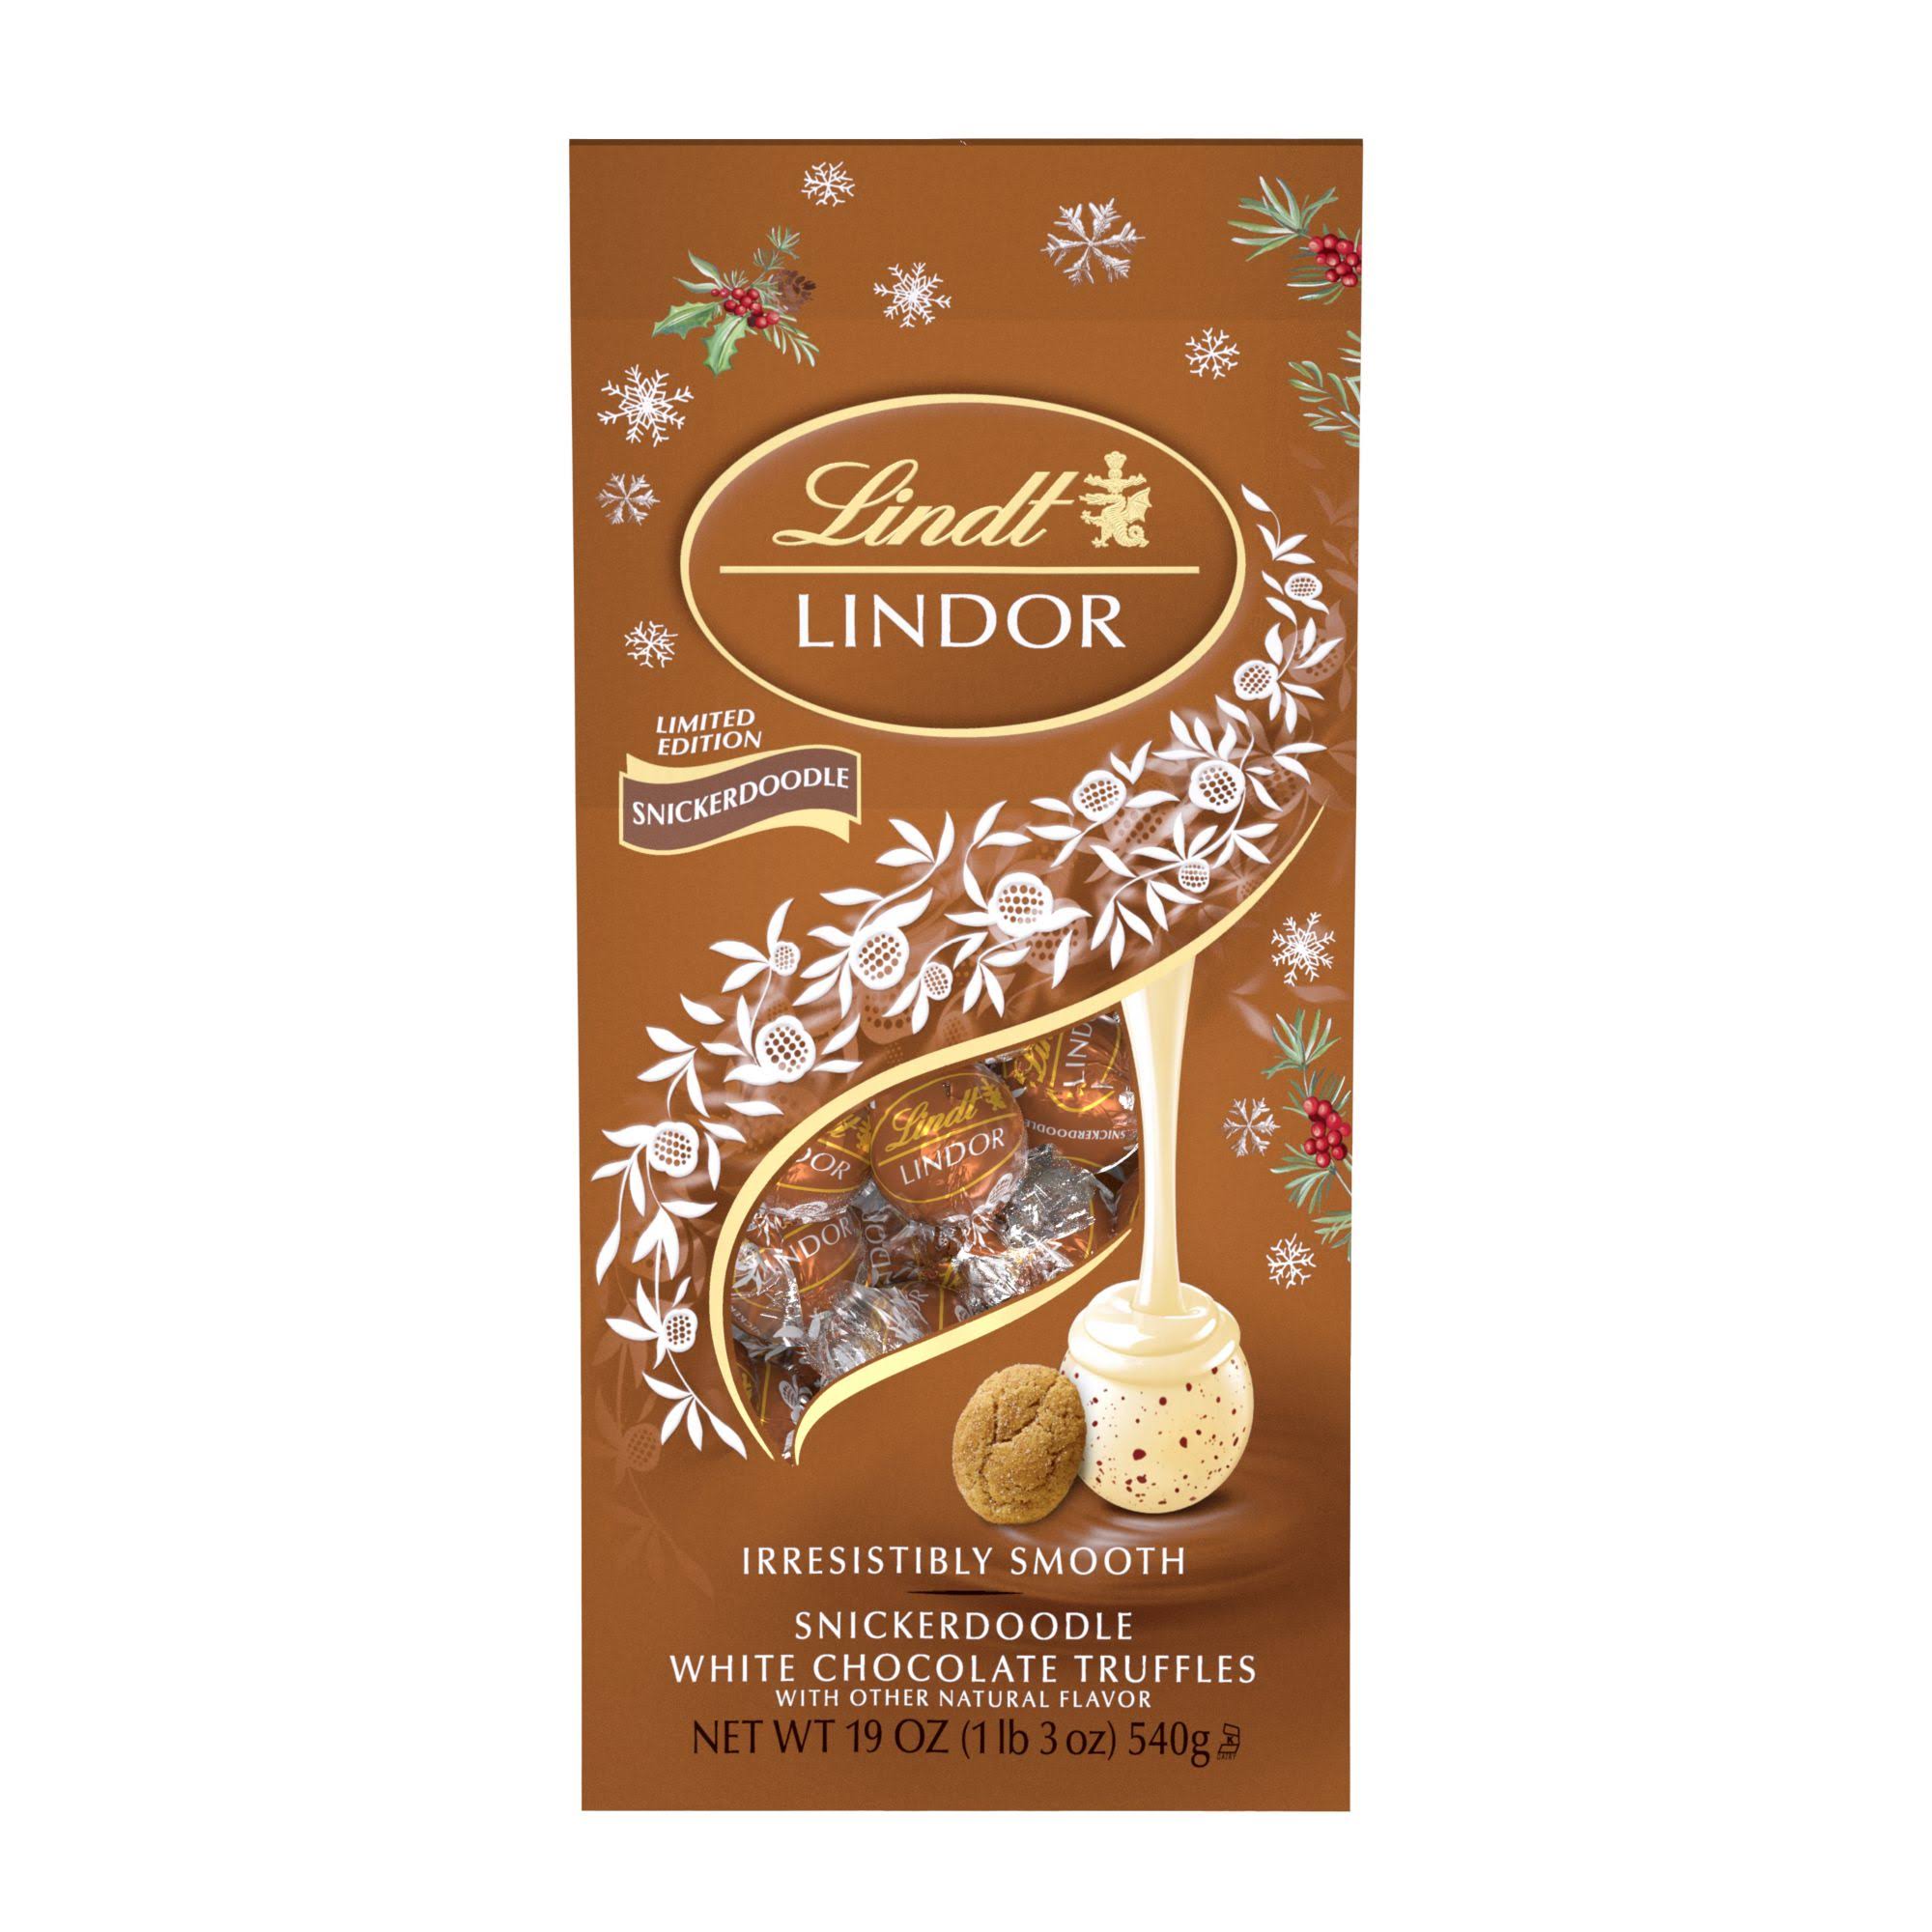 Lindt Lindor Snickerdoodle White Chocolate Truffles - 19.00 oz